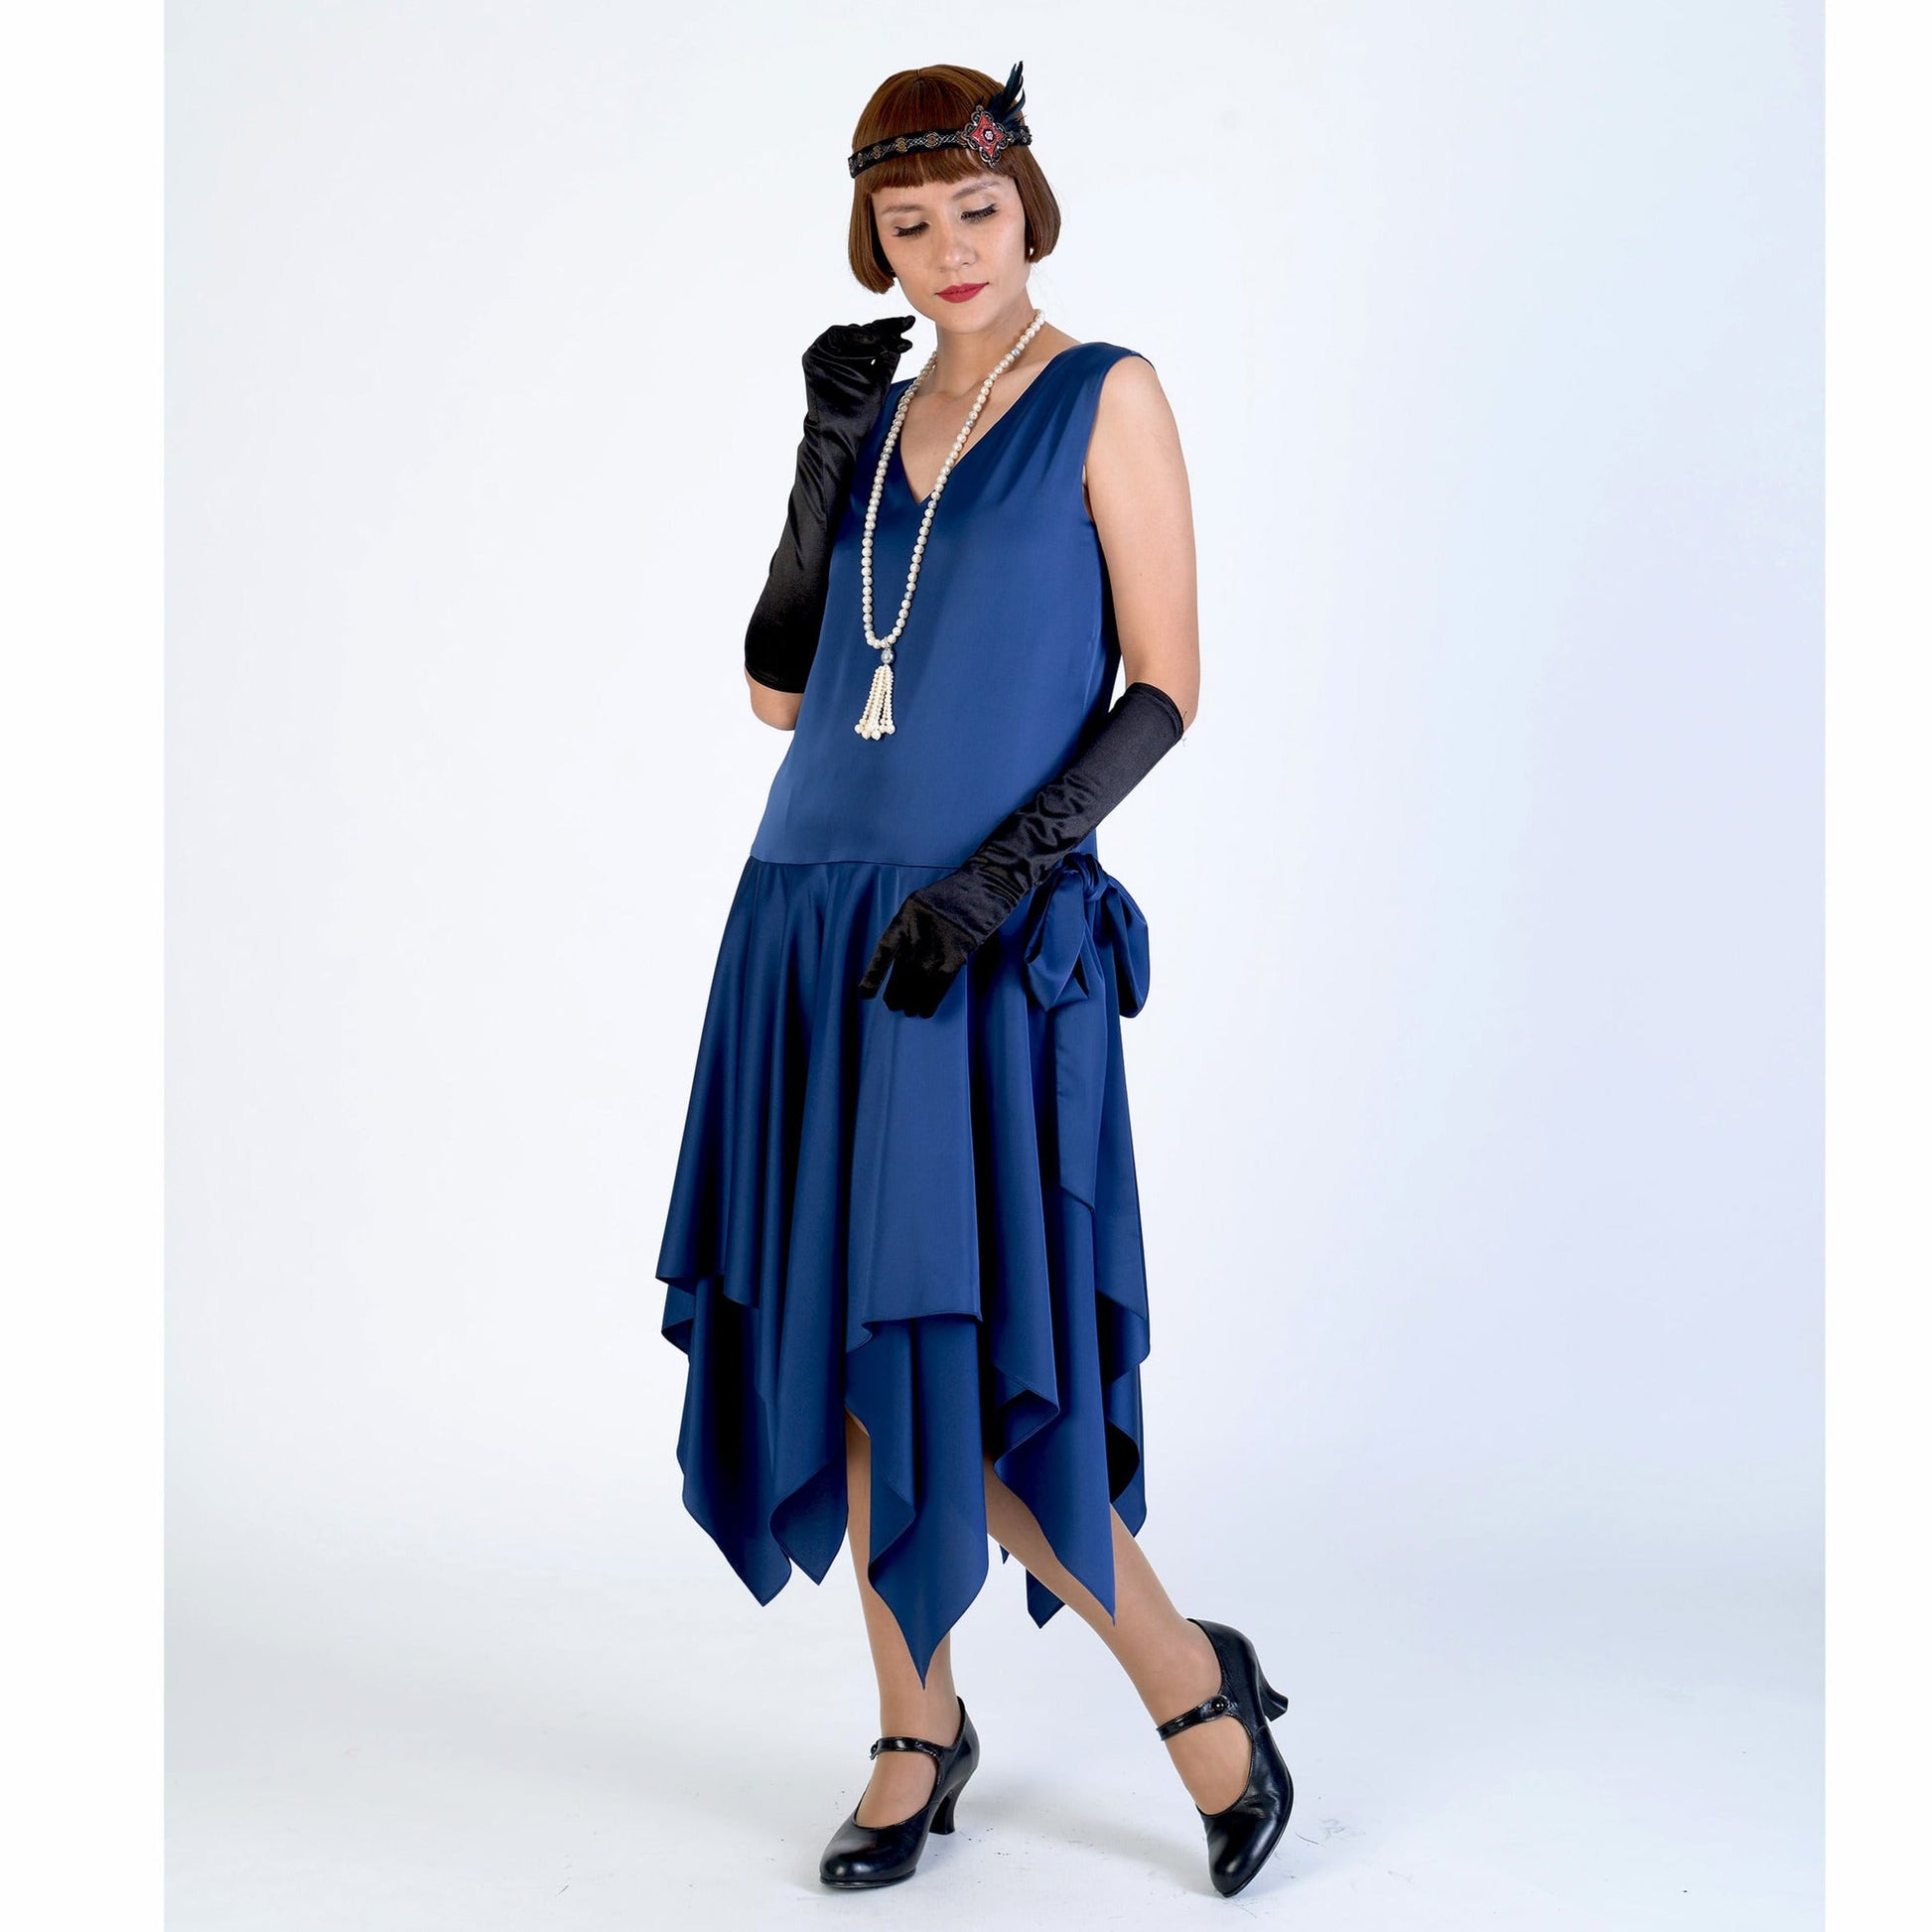 1920s dress with handkerchief skirt, made of dark blue satin, can be worn as a Charleston dress or a Great Gatsby party dress.